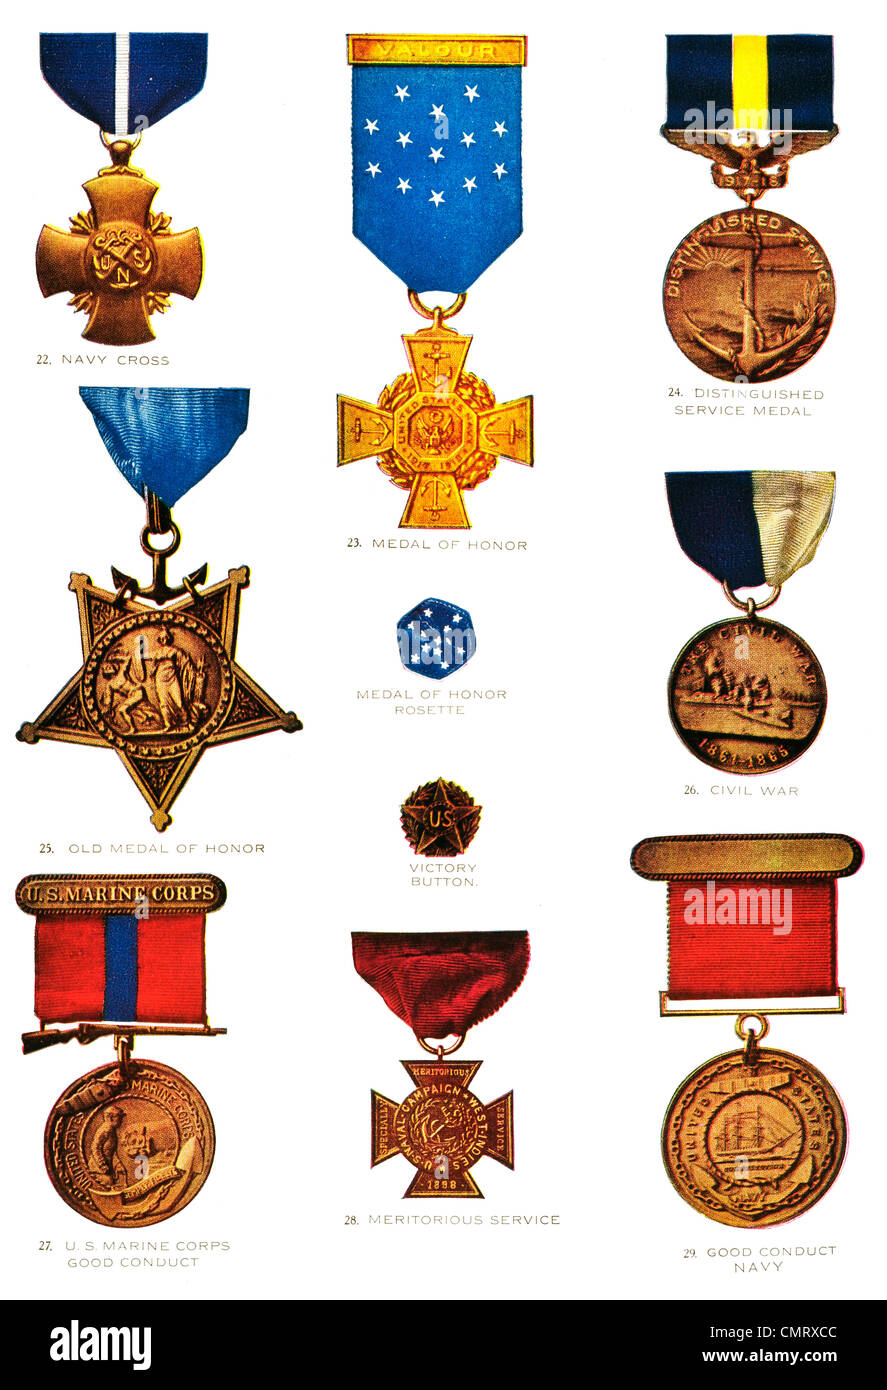 1919 Medals of Merit and Service United States Navy and Marine Corps Military Stock Photo